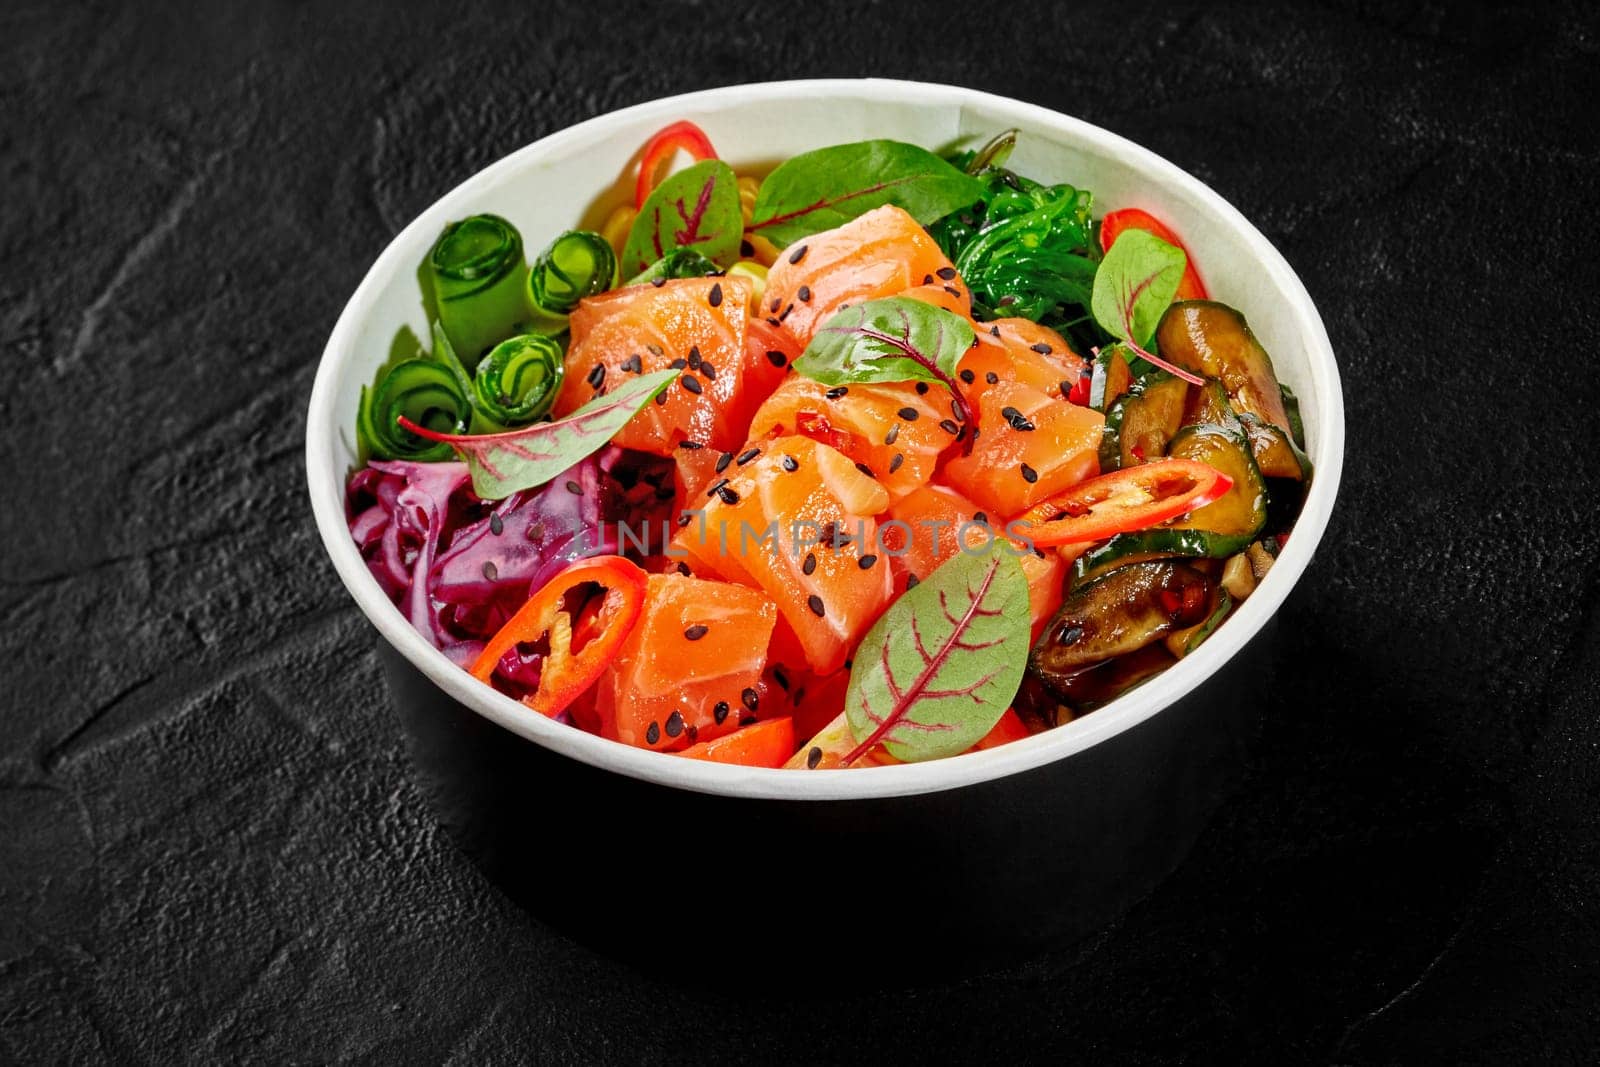 Vibrant salmon salad bursting with baked zucchini, fresh vegetables, greens and seaweed sprinkled with sesame seeds, served in cardboard bowl on dark background. Healthy snack. Delivery food